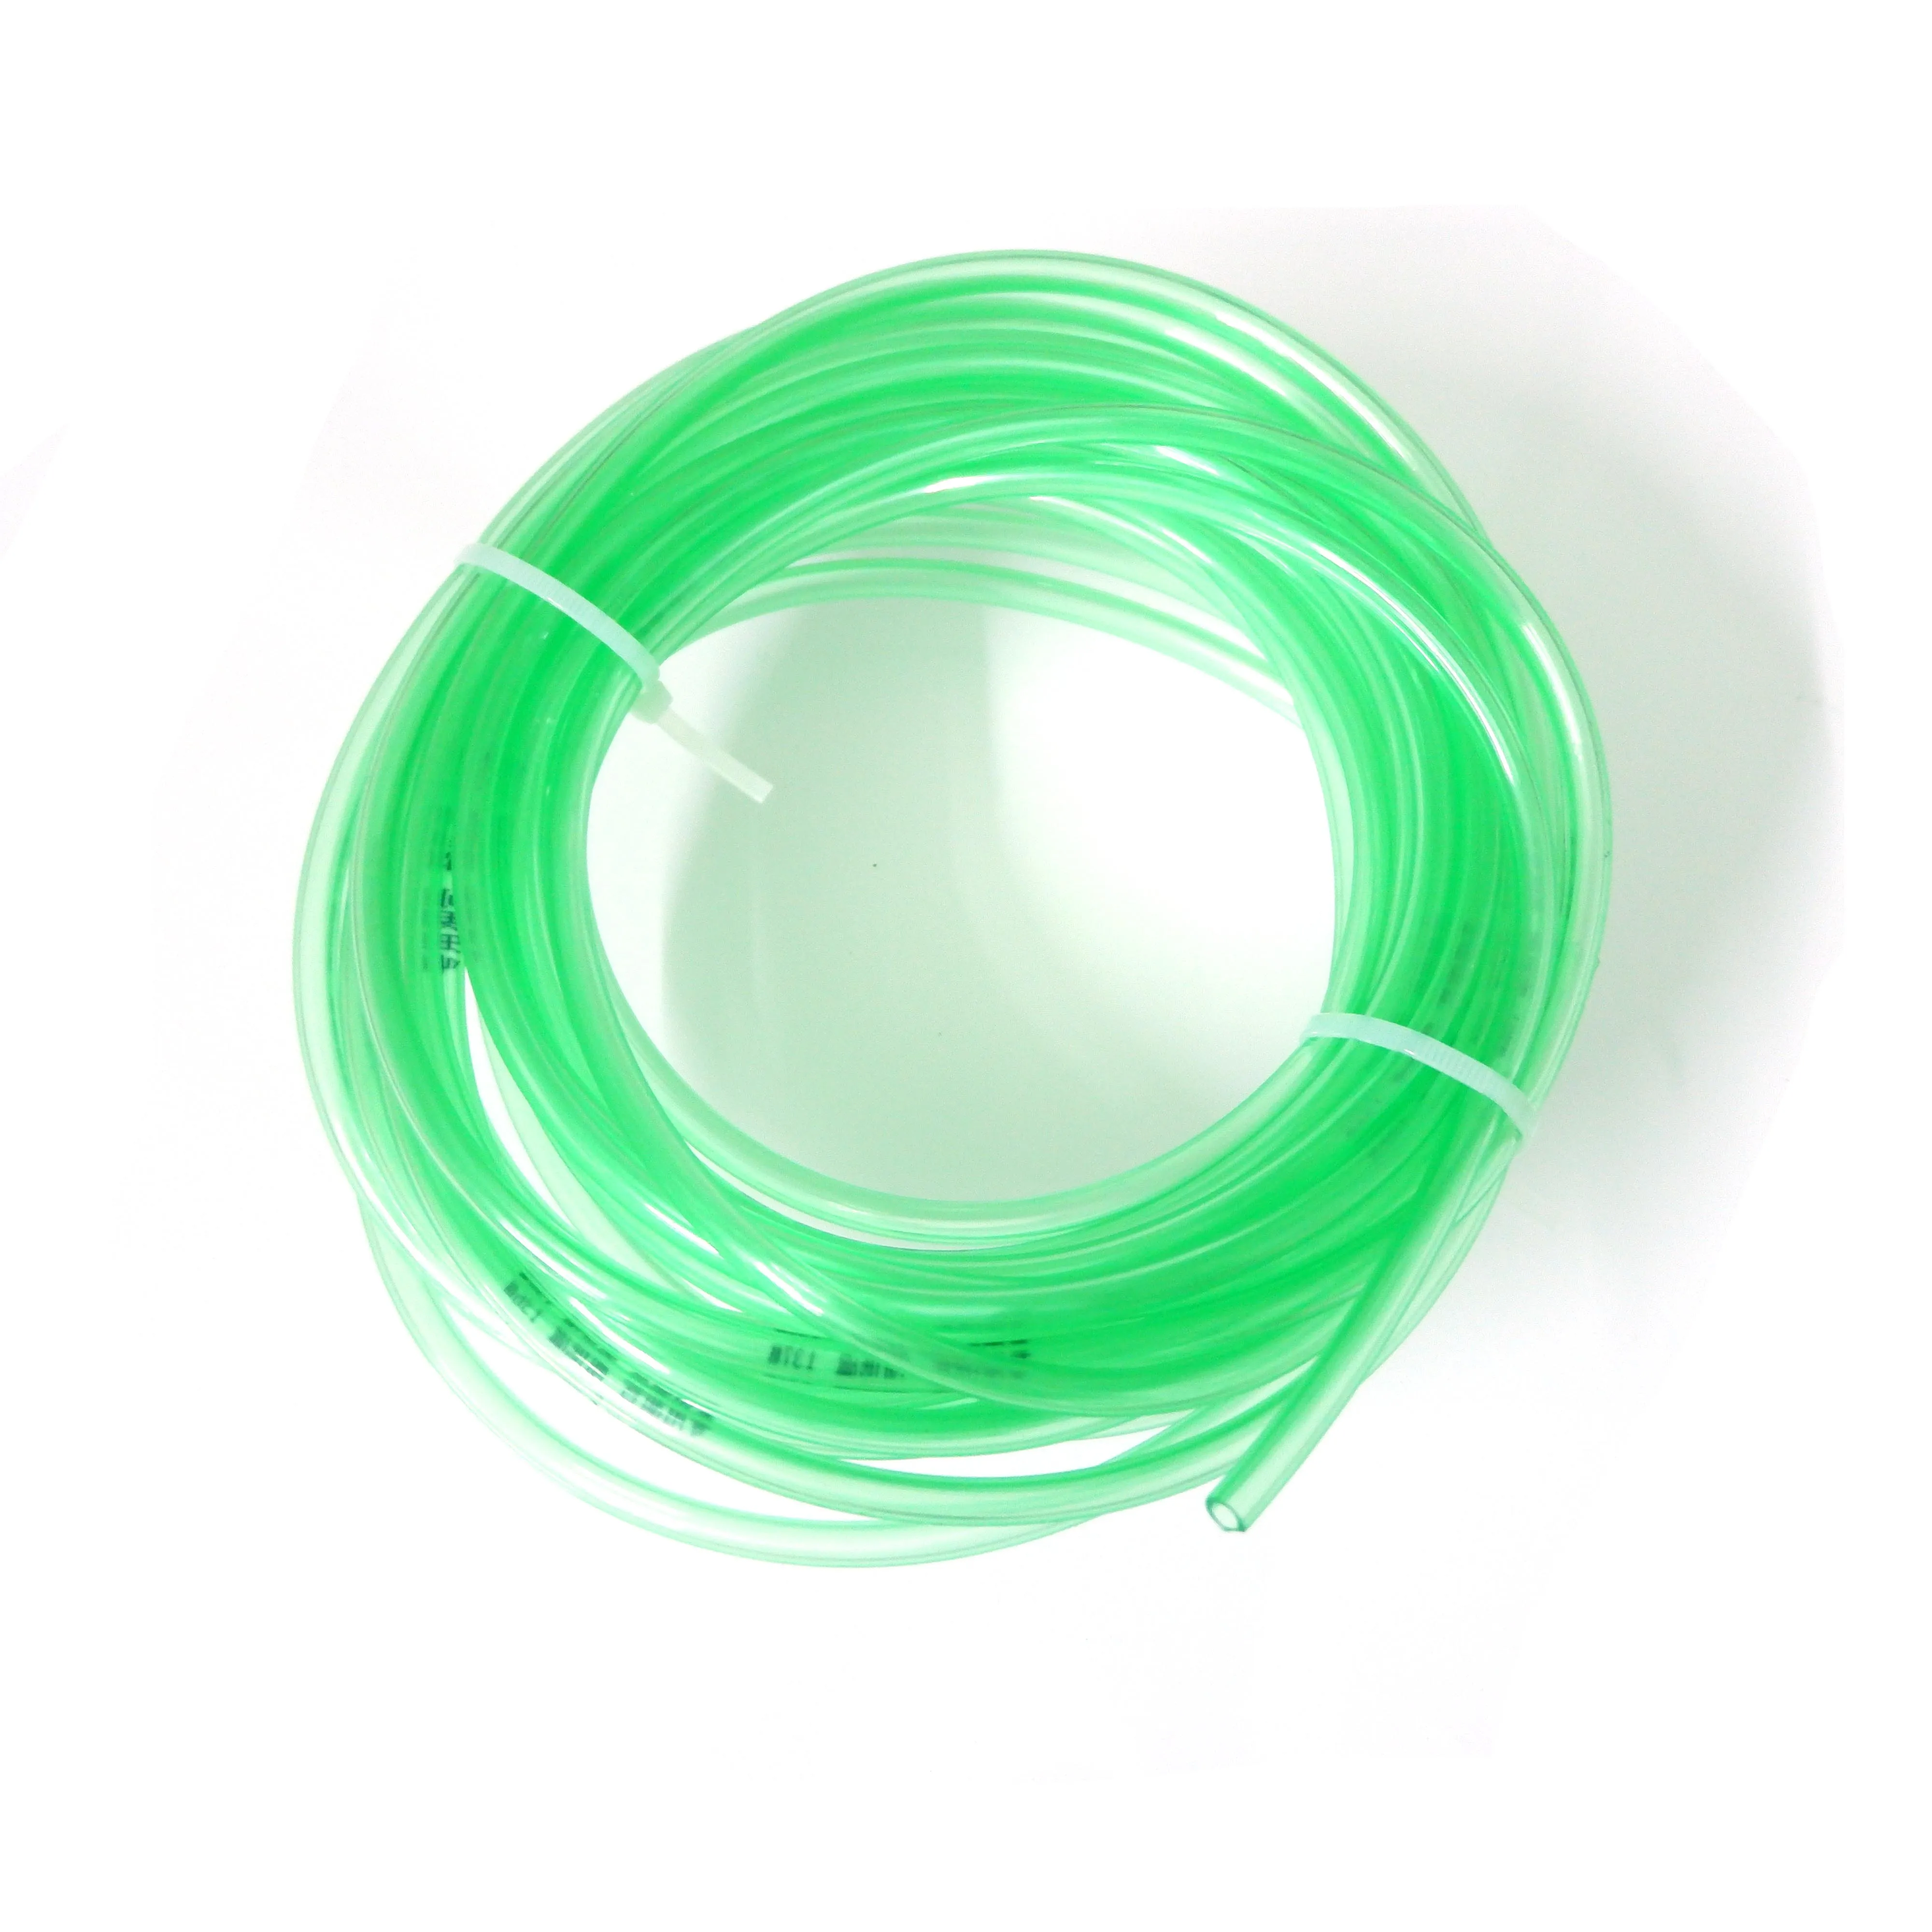 5M / 10M Fuel Pipe Hose Line Green 4.4mm For Car Truck Air Diesel Parking Heater Oil Pump For Eberspacher Dedicated Tubing